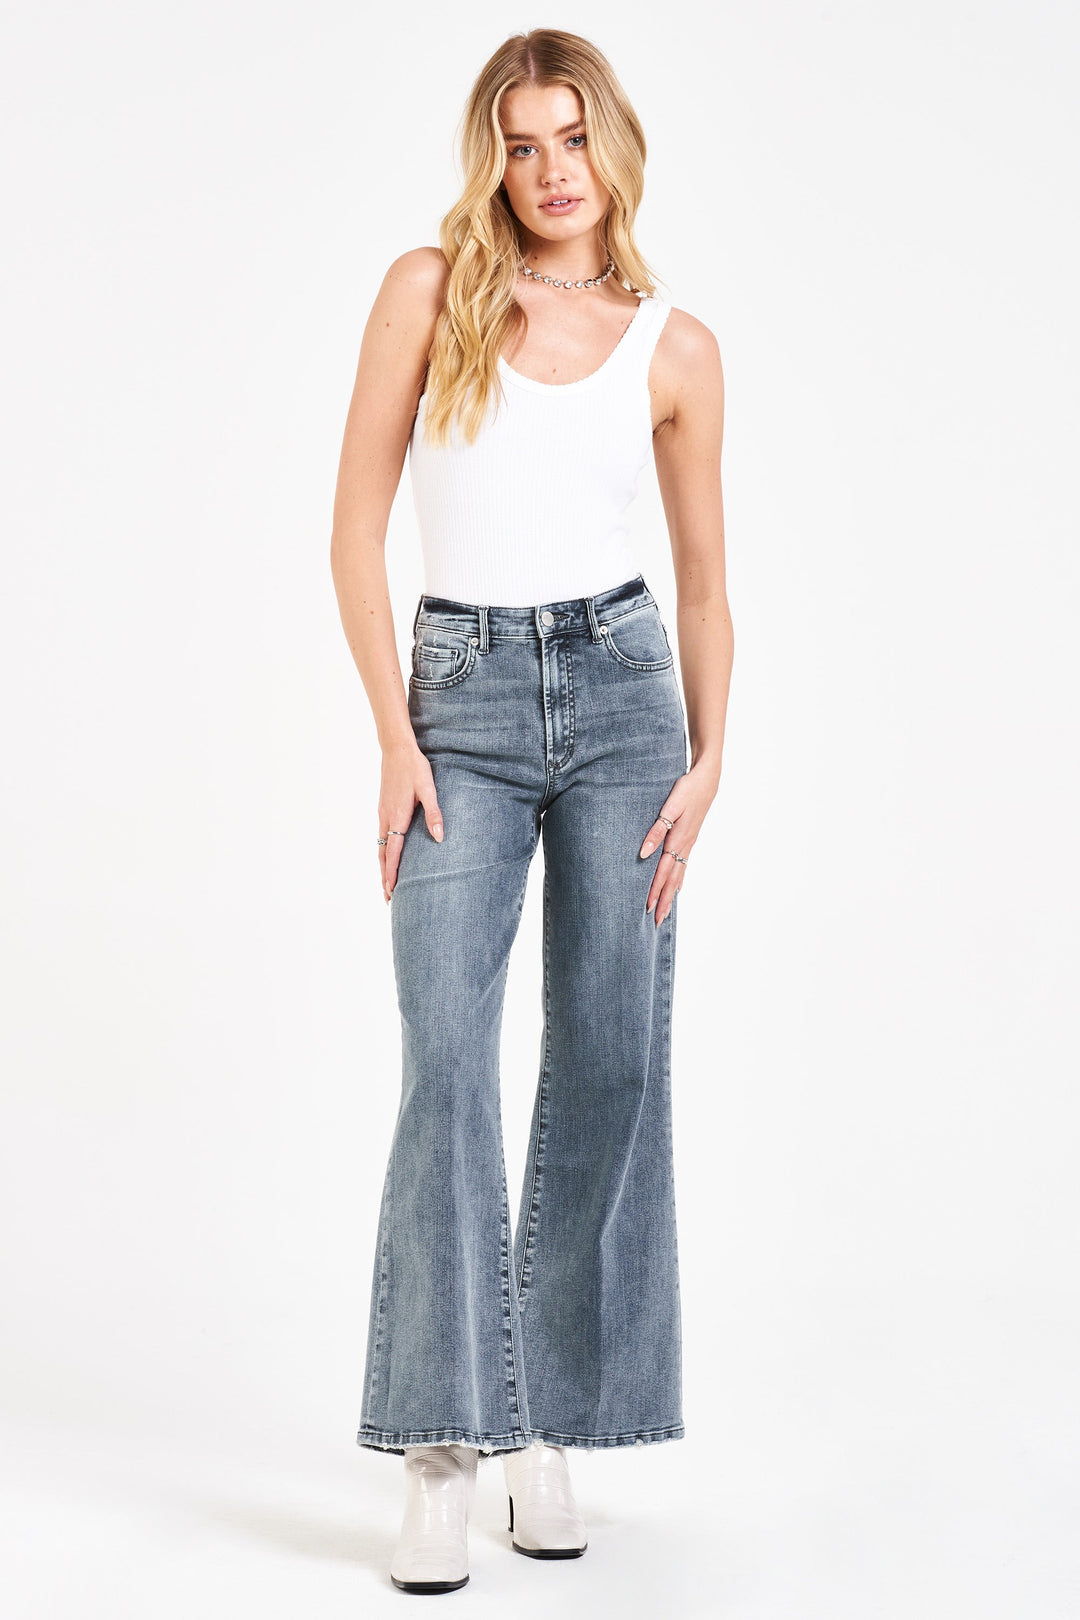 image of a female model wearing a FIONA SUPER HIGH RISE WIDE LEG JEANS EAST FAIRFAX JEANS